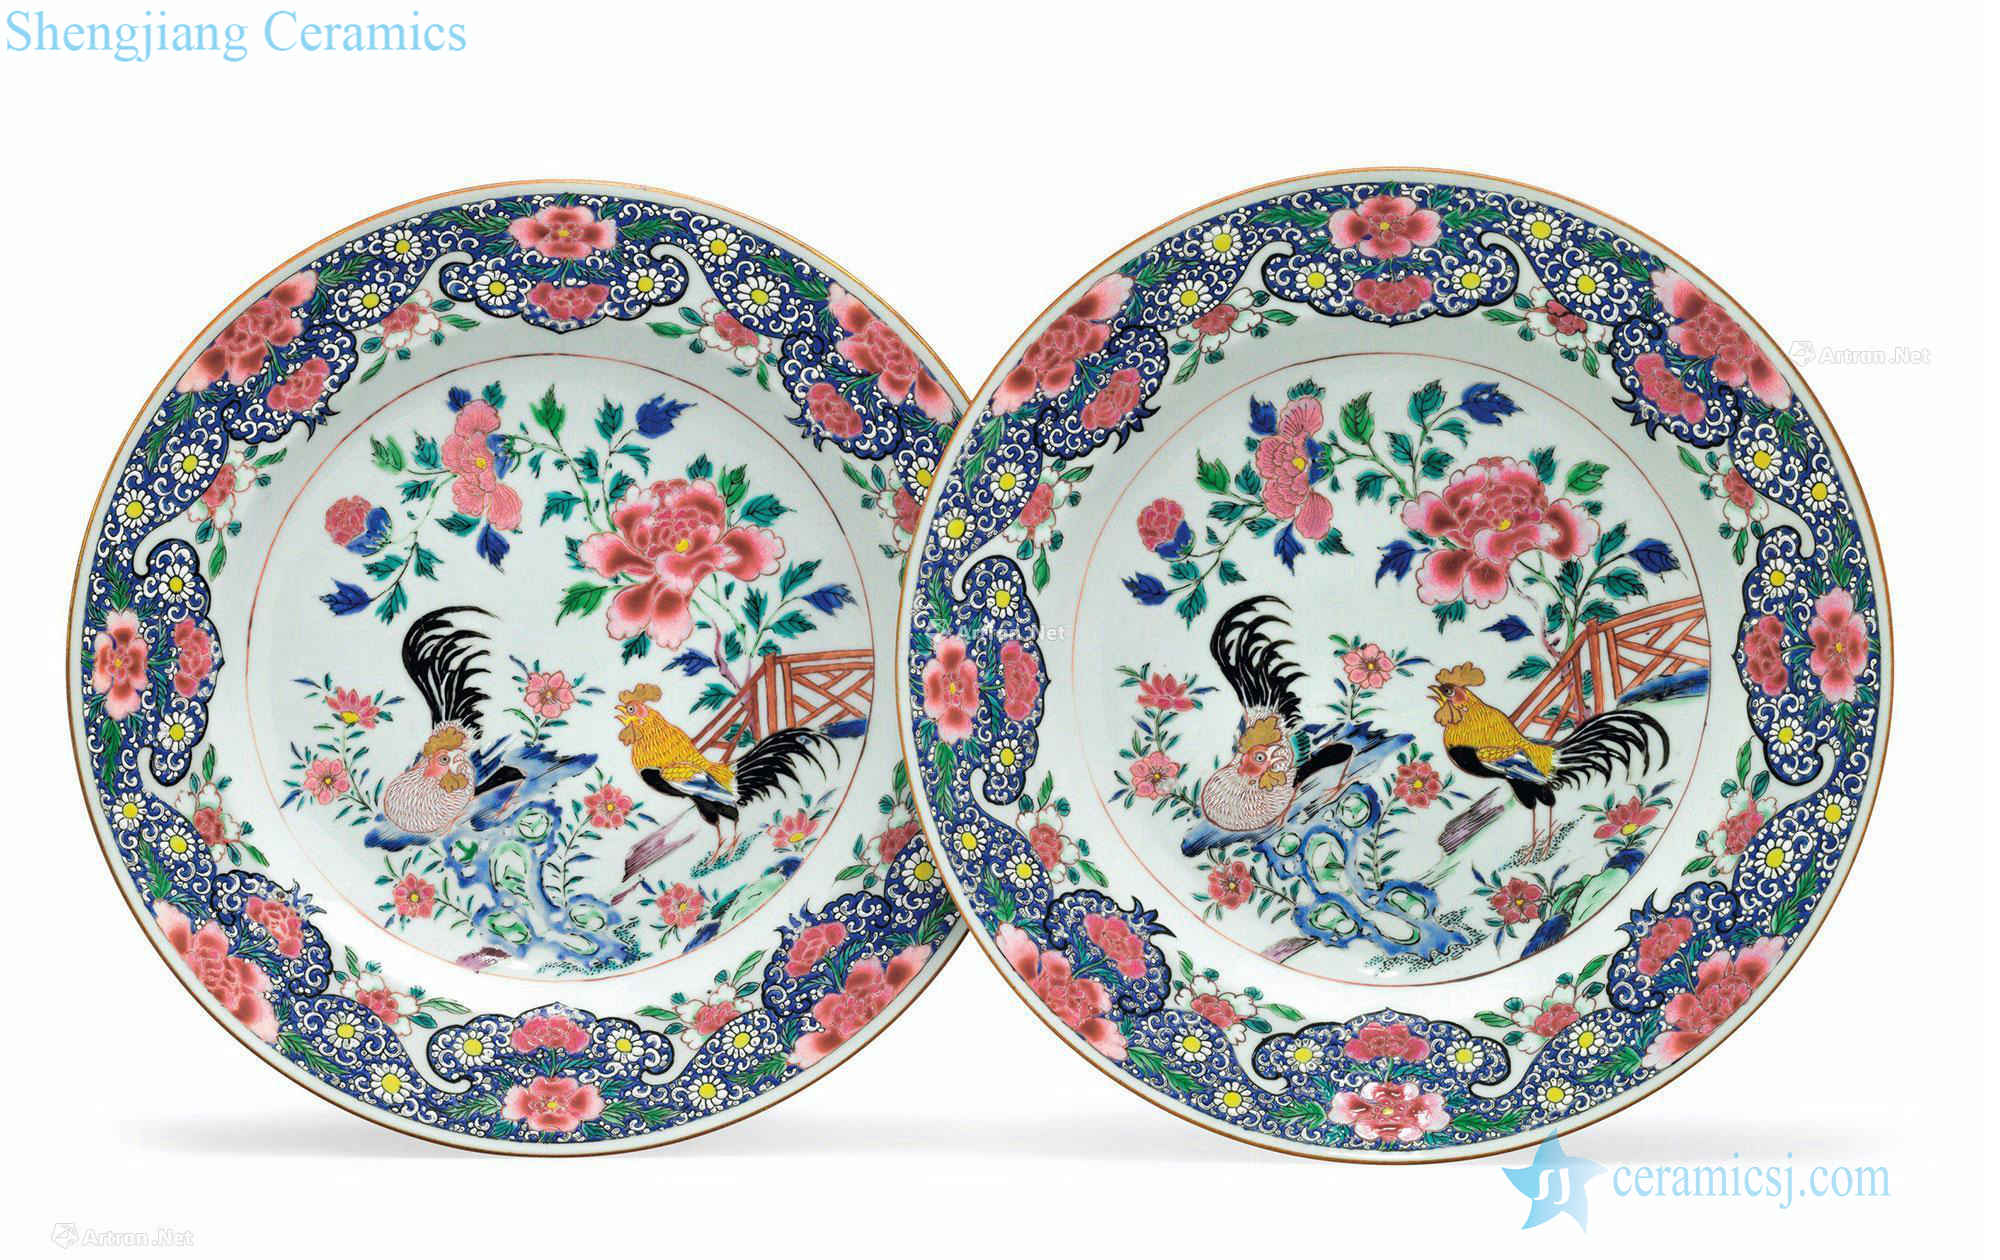 The qianlong period, 1736-95 - A PAIR OF FAMILLE ROSE COCKEREL DISHES